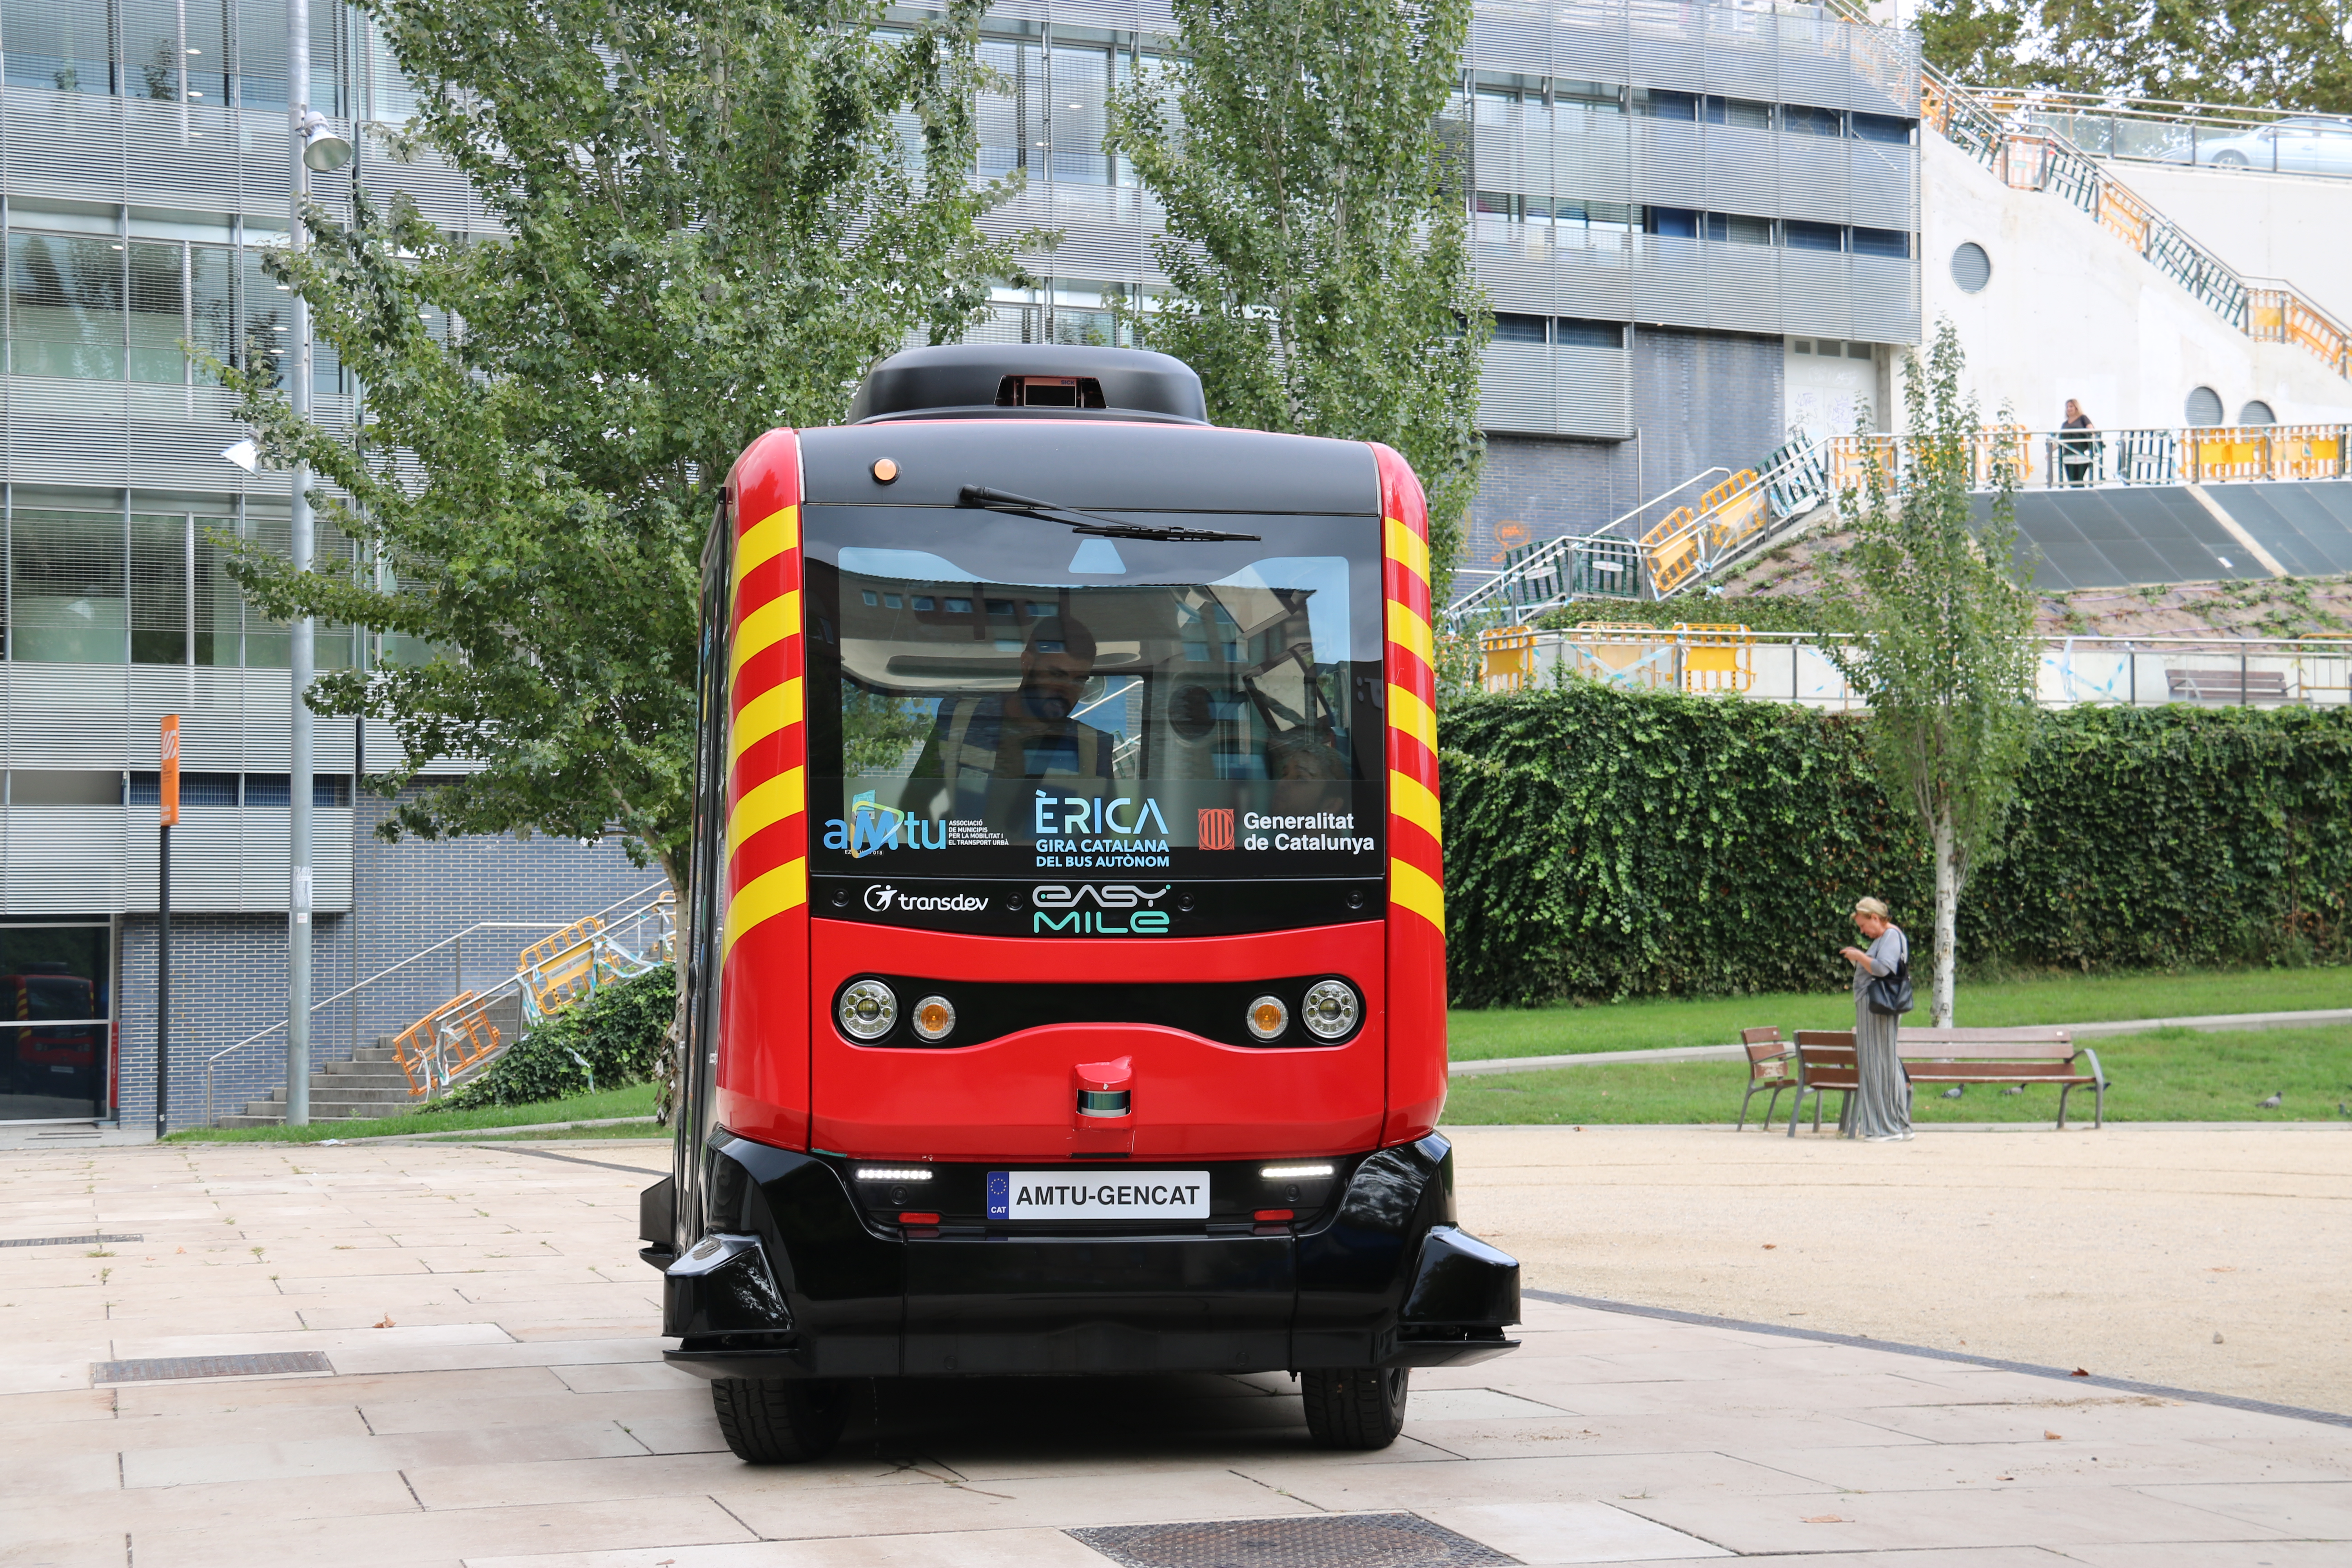 The ERICA driverless bus in Terrassa on September 18 2018 (by Catalan News)